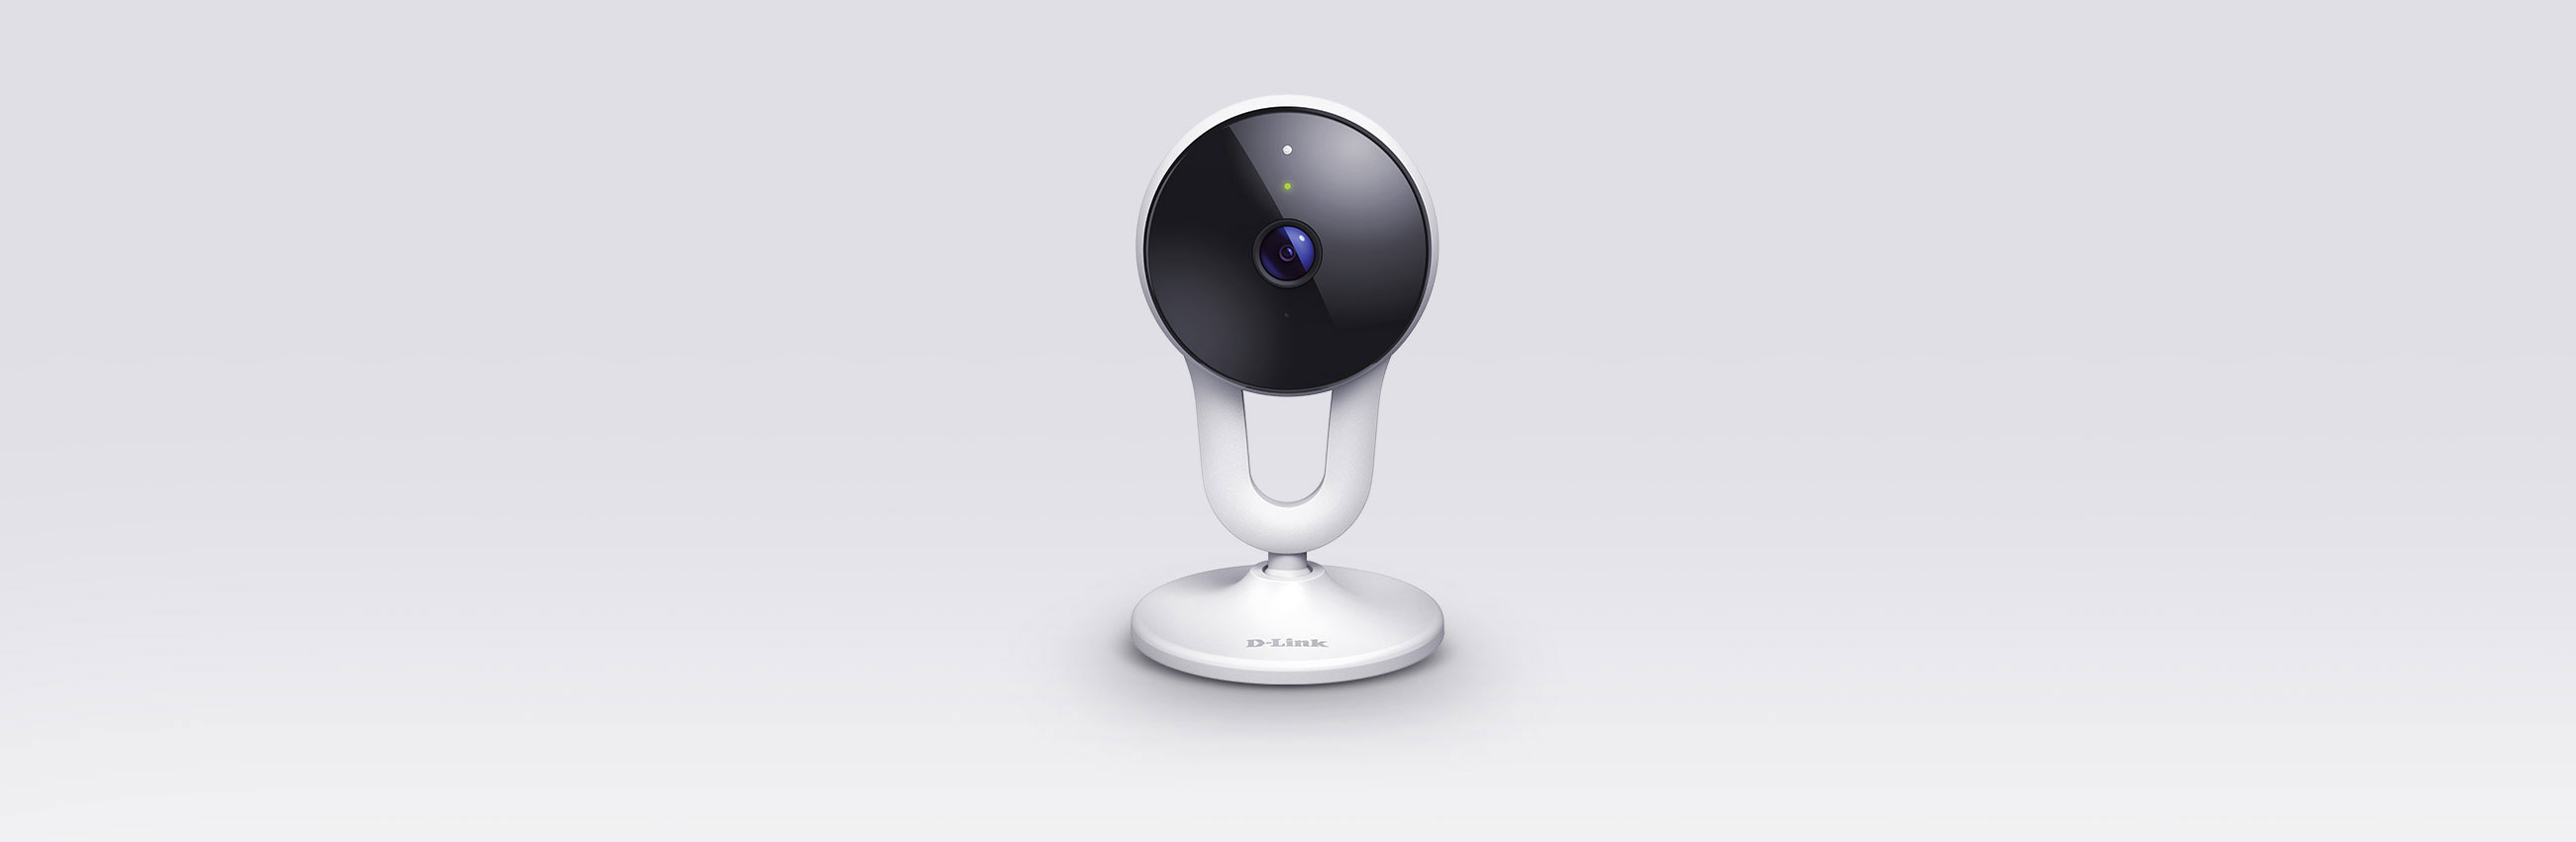 DCS-8300:H Full HD Wi-Fi Camera with a grey background.